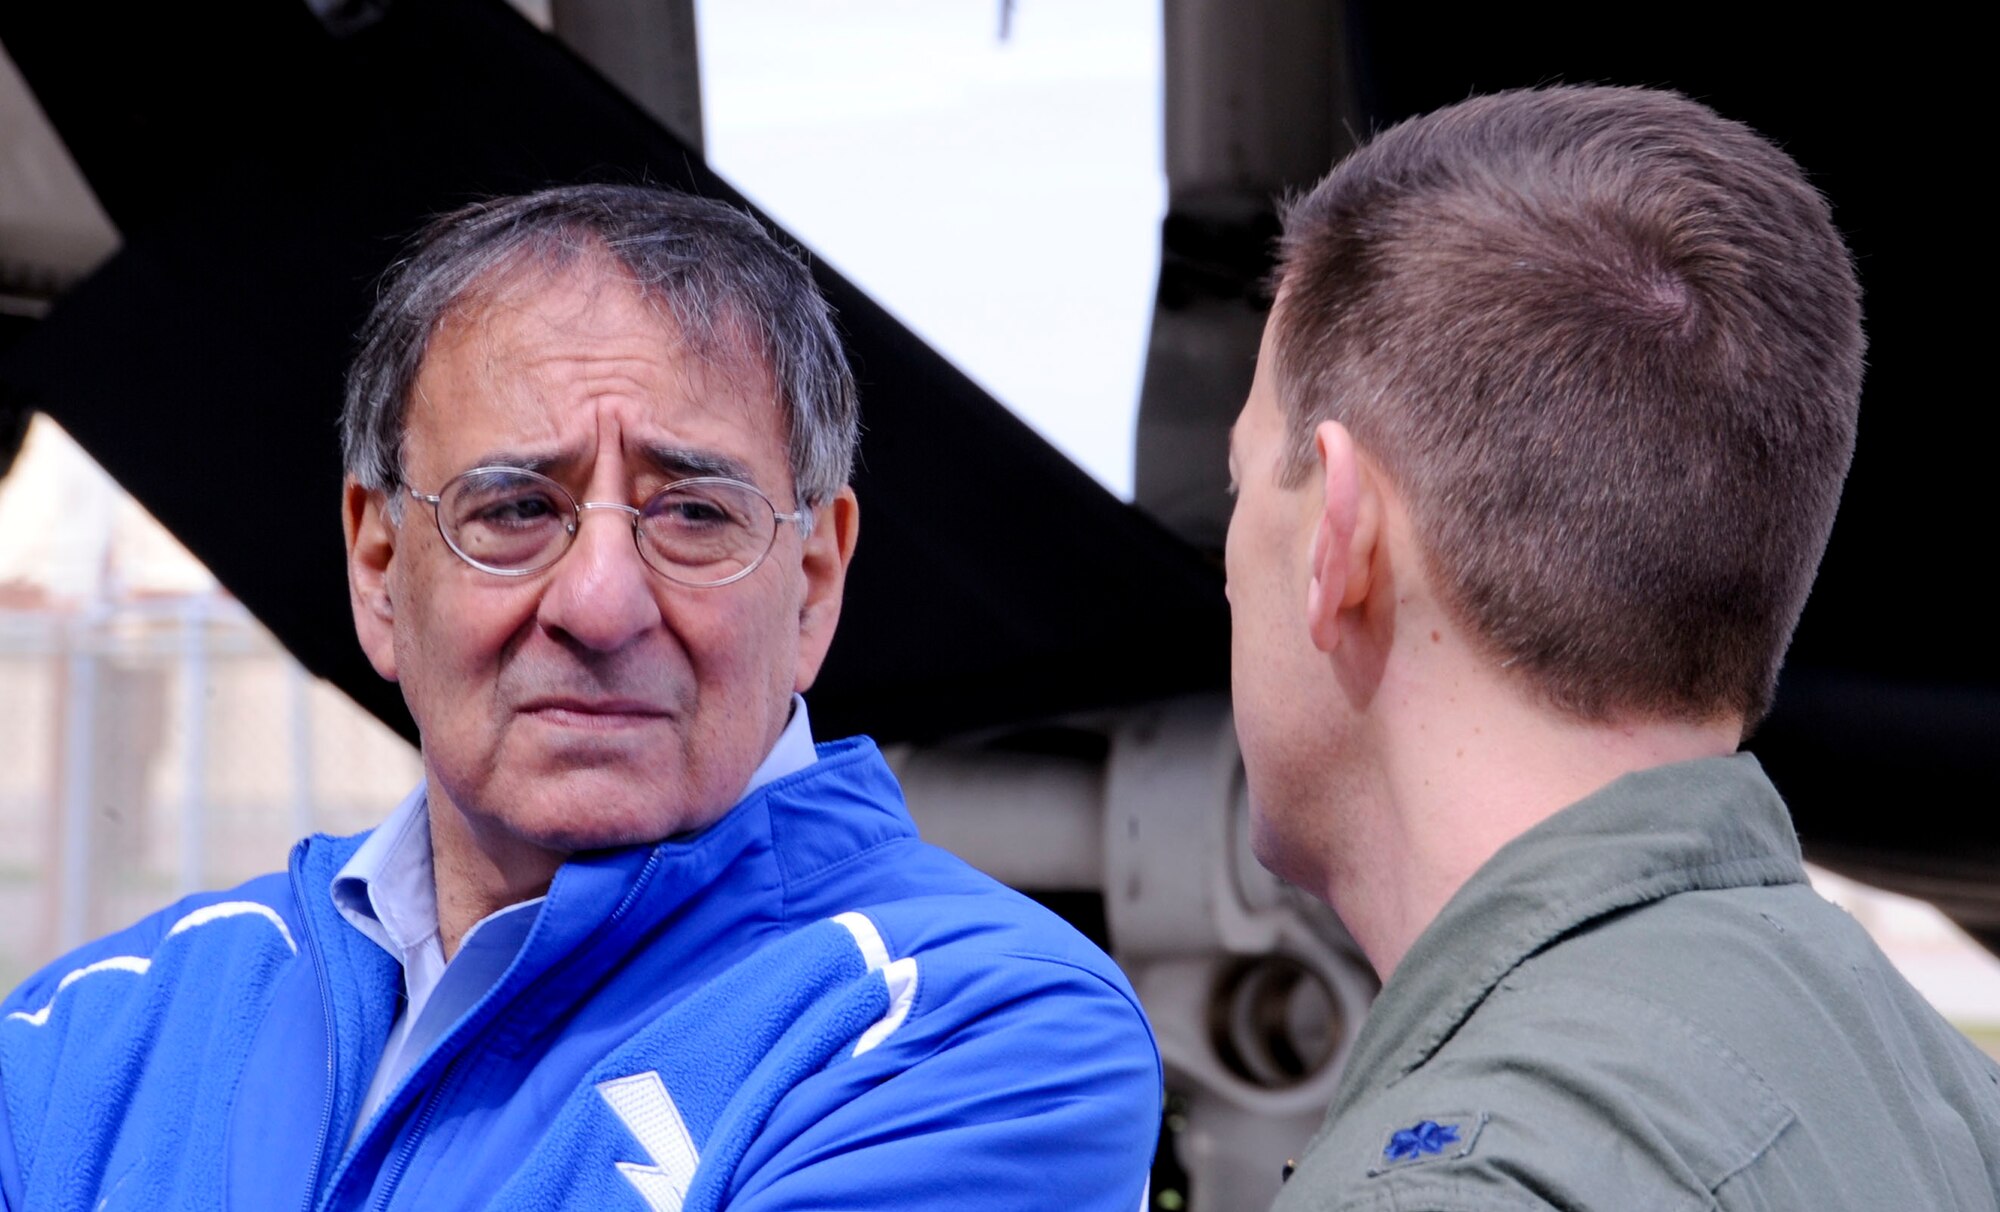 Secretary of Defense Leon E. Panetta speaks with a B-1B Lancer crew member during his visit to Barksdale Air Force Base, La., Feb. 17. The Secretary hosted an All-Call with more than 300 Airmen to thank them for their efforts in operating, maintaining and supporting the long range strike missions performed by the B-52H Stratofortress, B-2 Spirit and B-1B Lancer bomber aircraft. (U.S. Air Force photo/Senior Airman La'Shanette V. Garrett)(RELEASED)